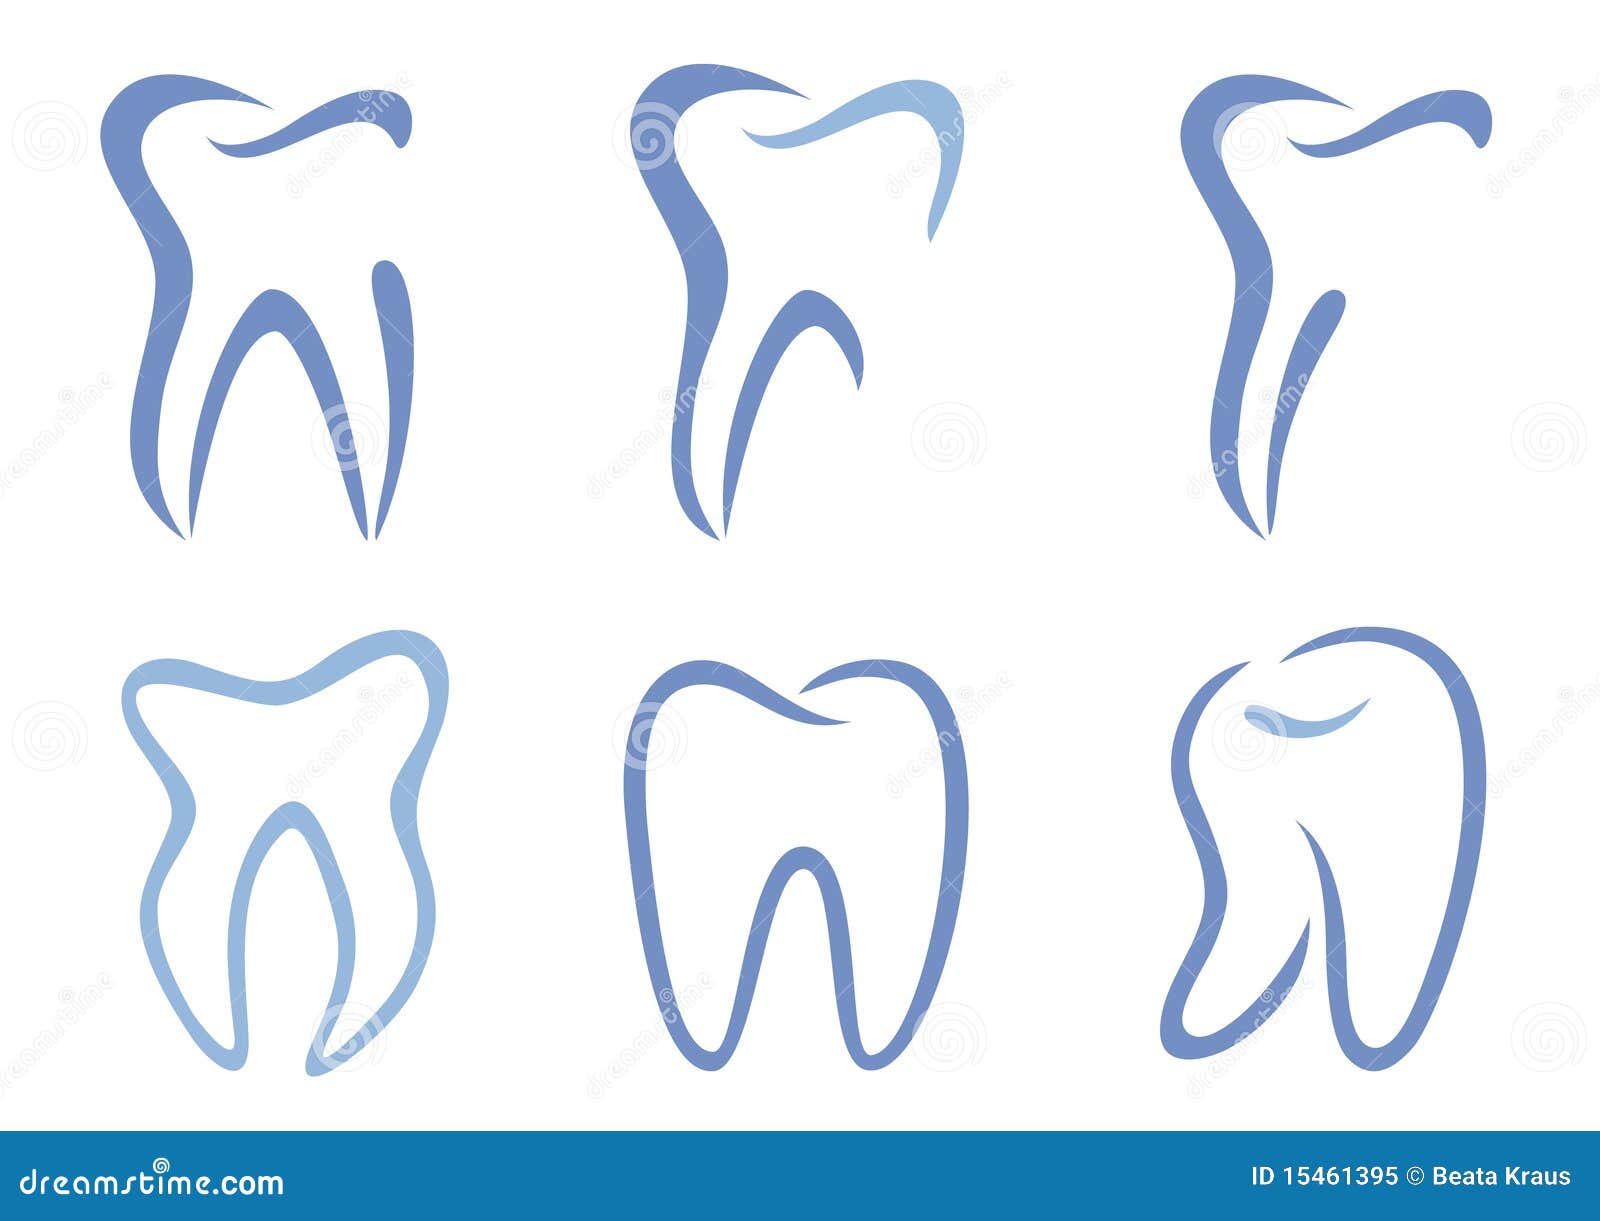 tooth clip art free download - photo #24